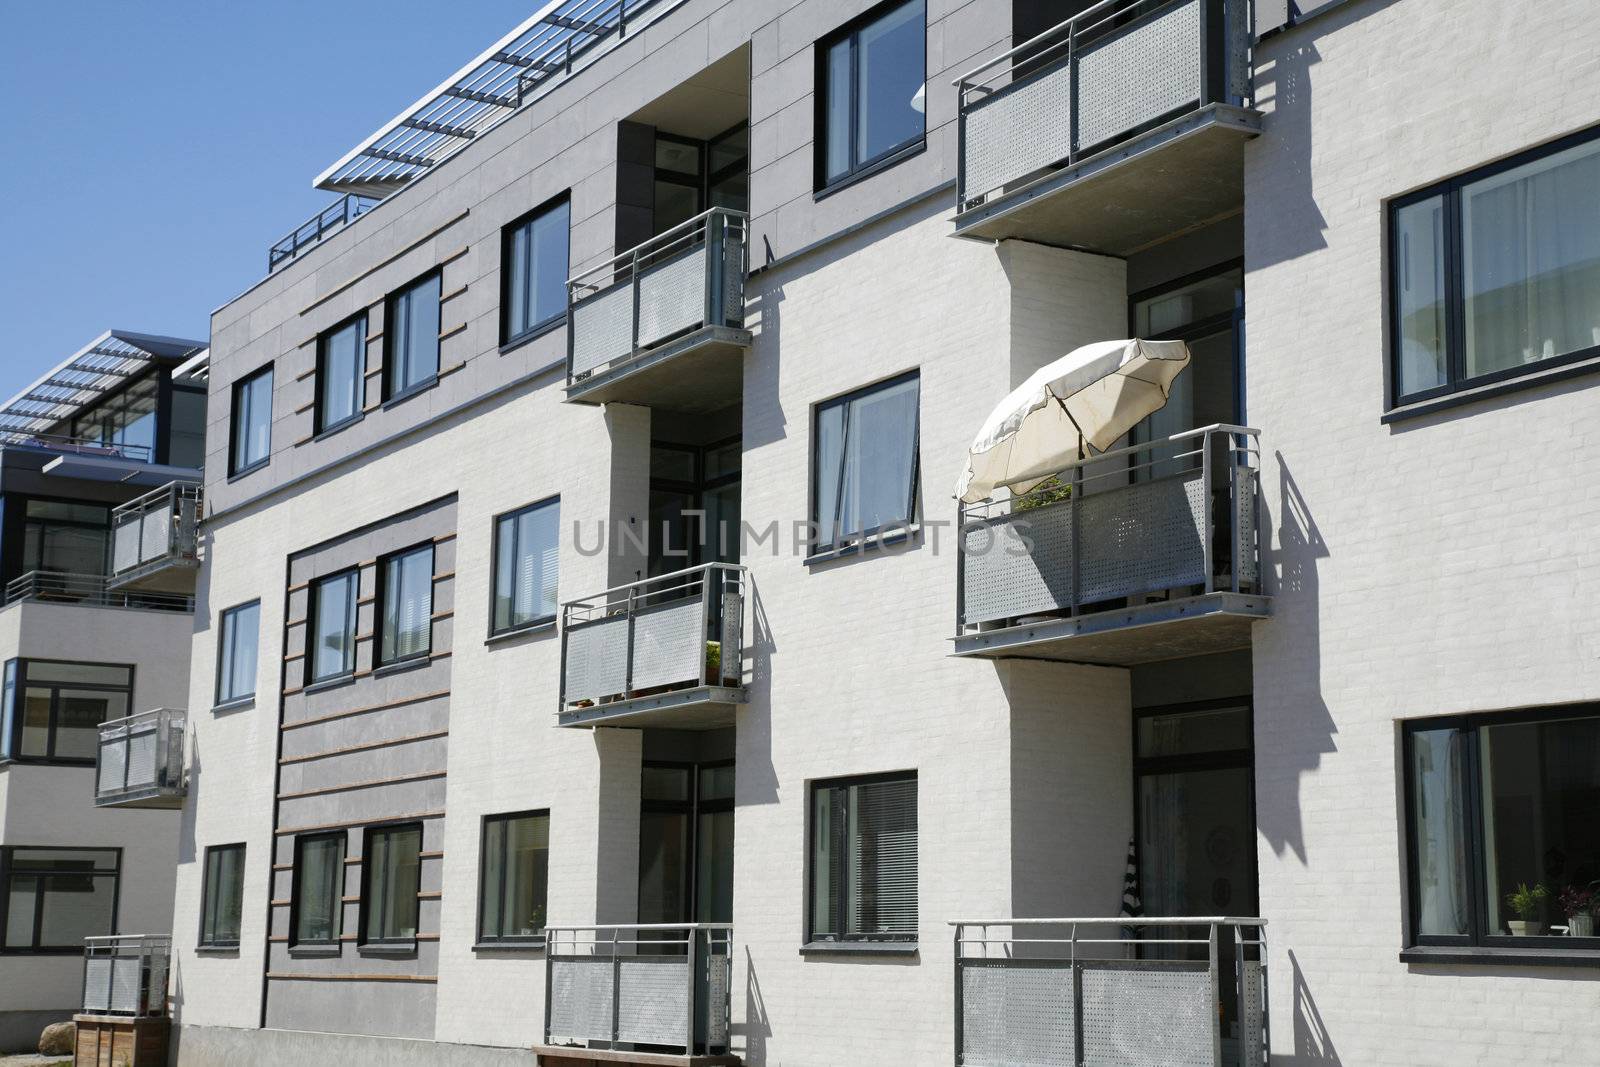 New apartment building at the waterfront of Nyborg, Denmark